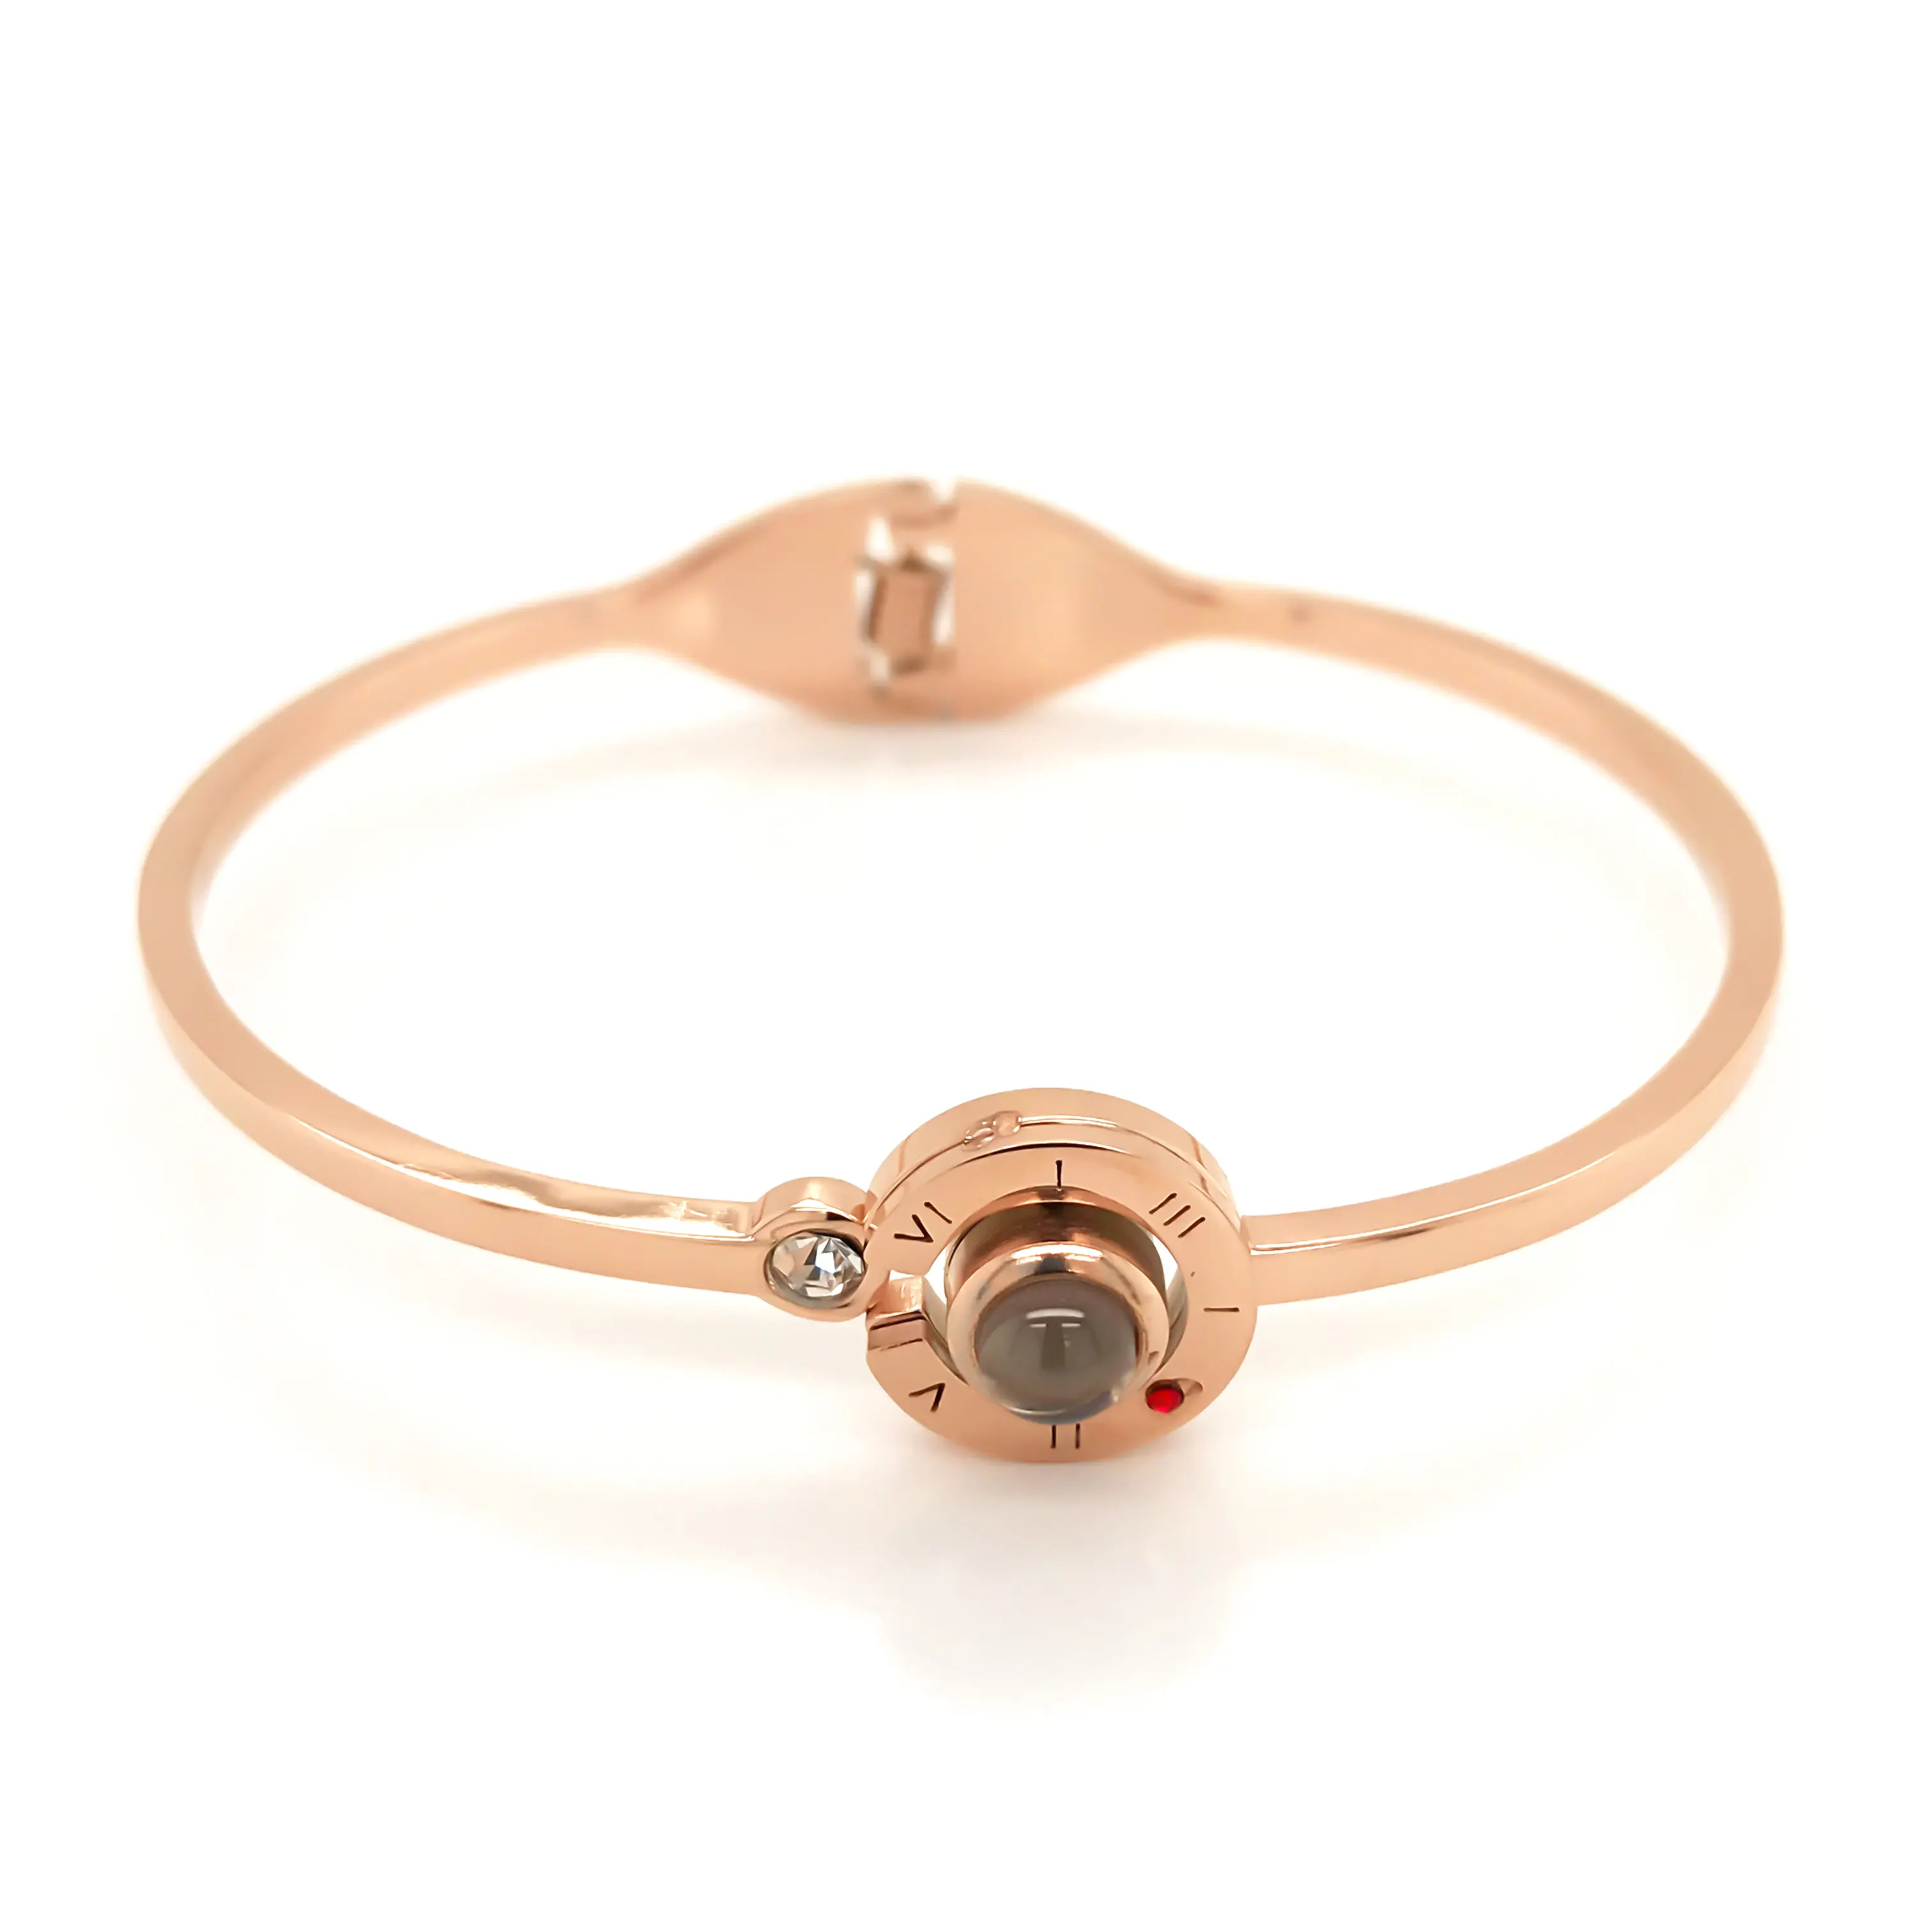 Rose Bangle Costume Rose Gold Stainless Steel 100 Languages I Love You Statement Bangle Love Forever Jewelry